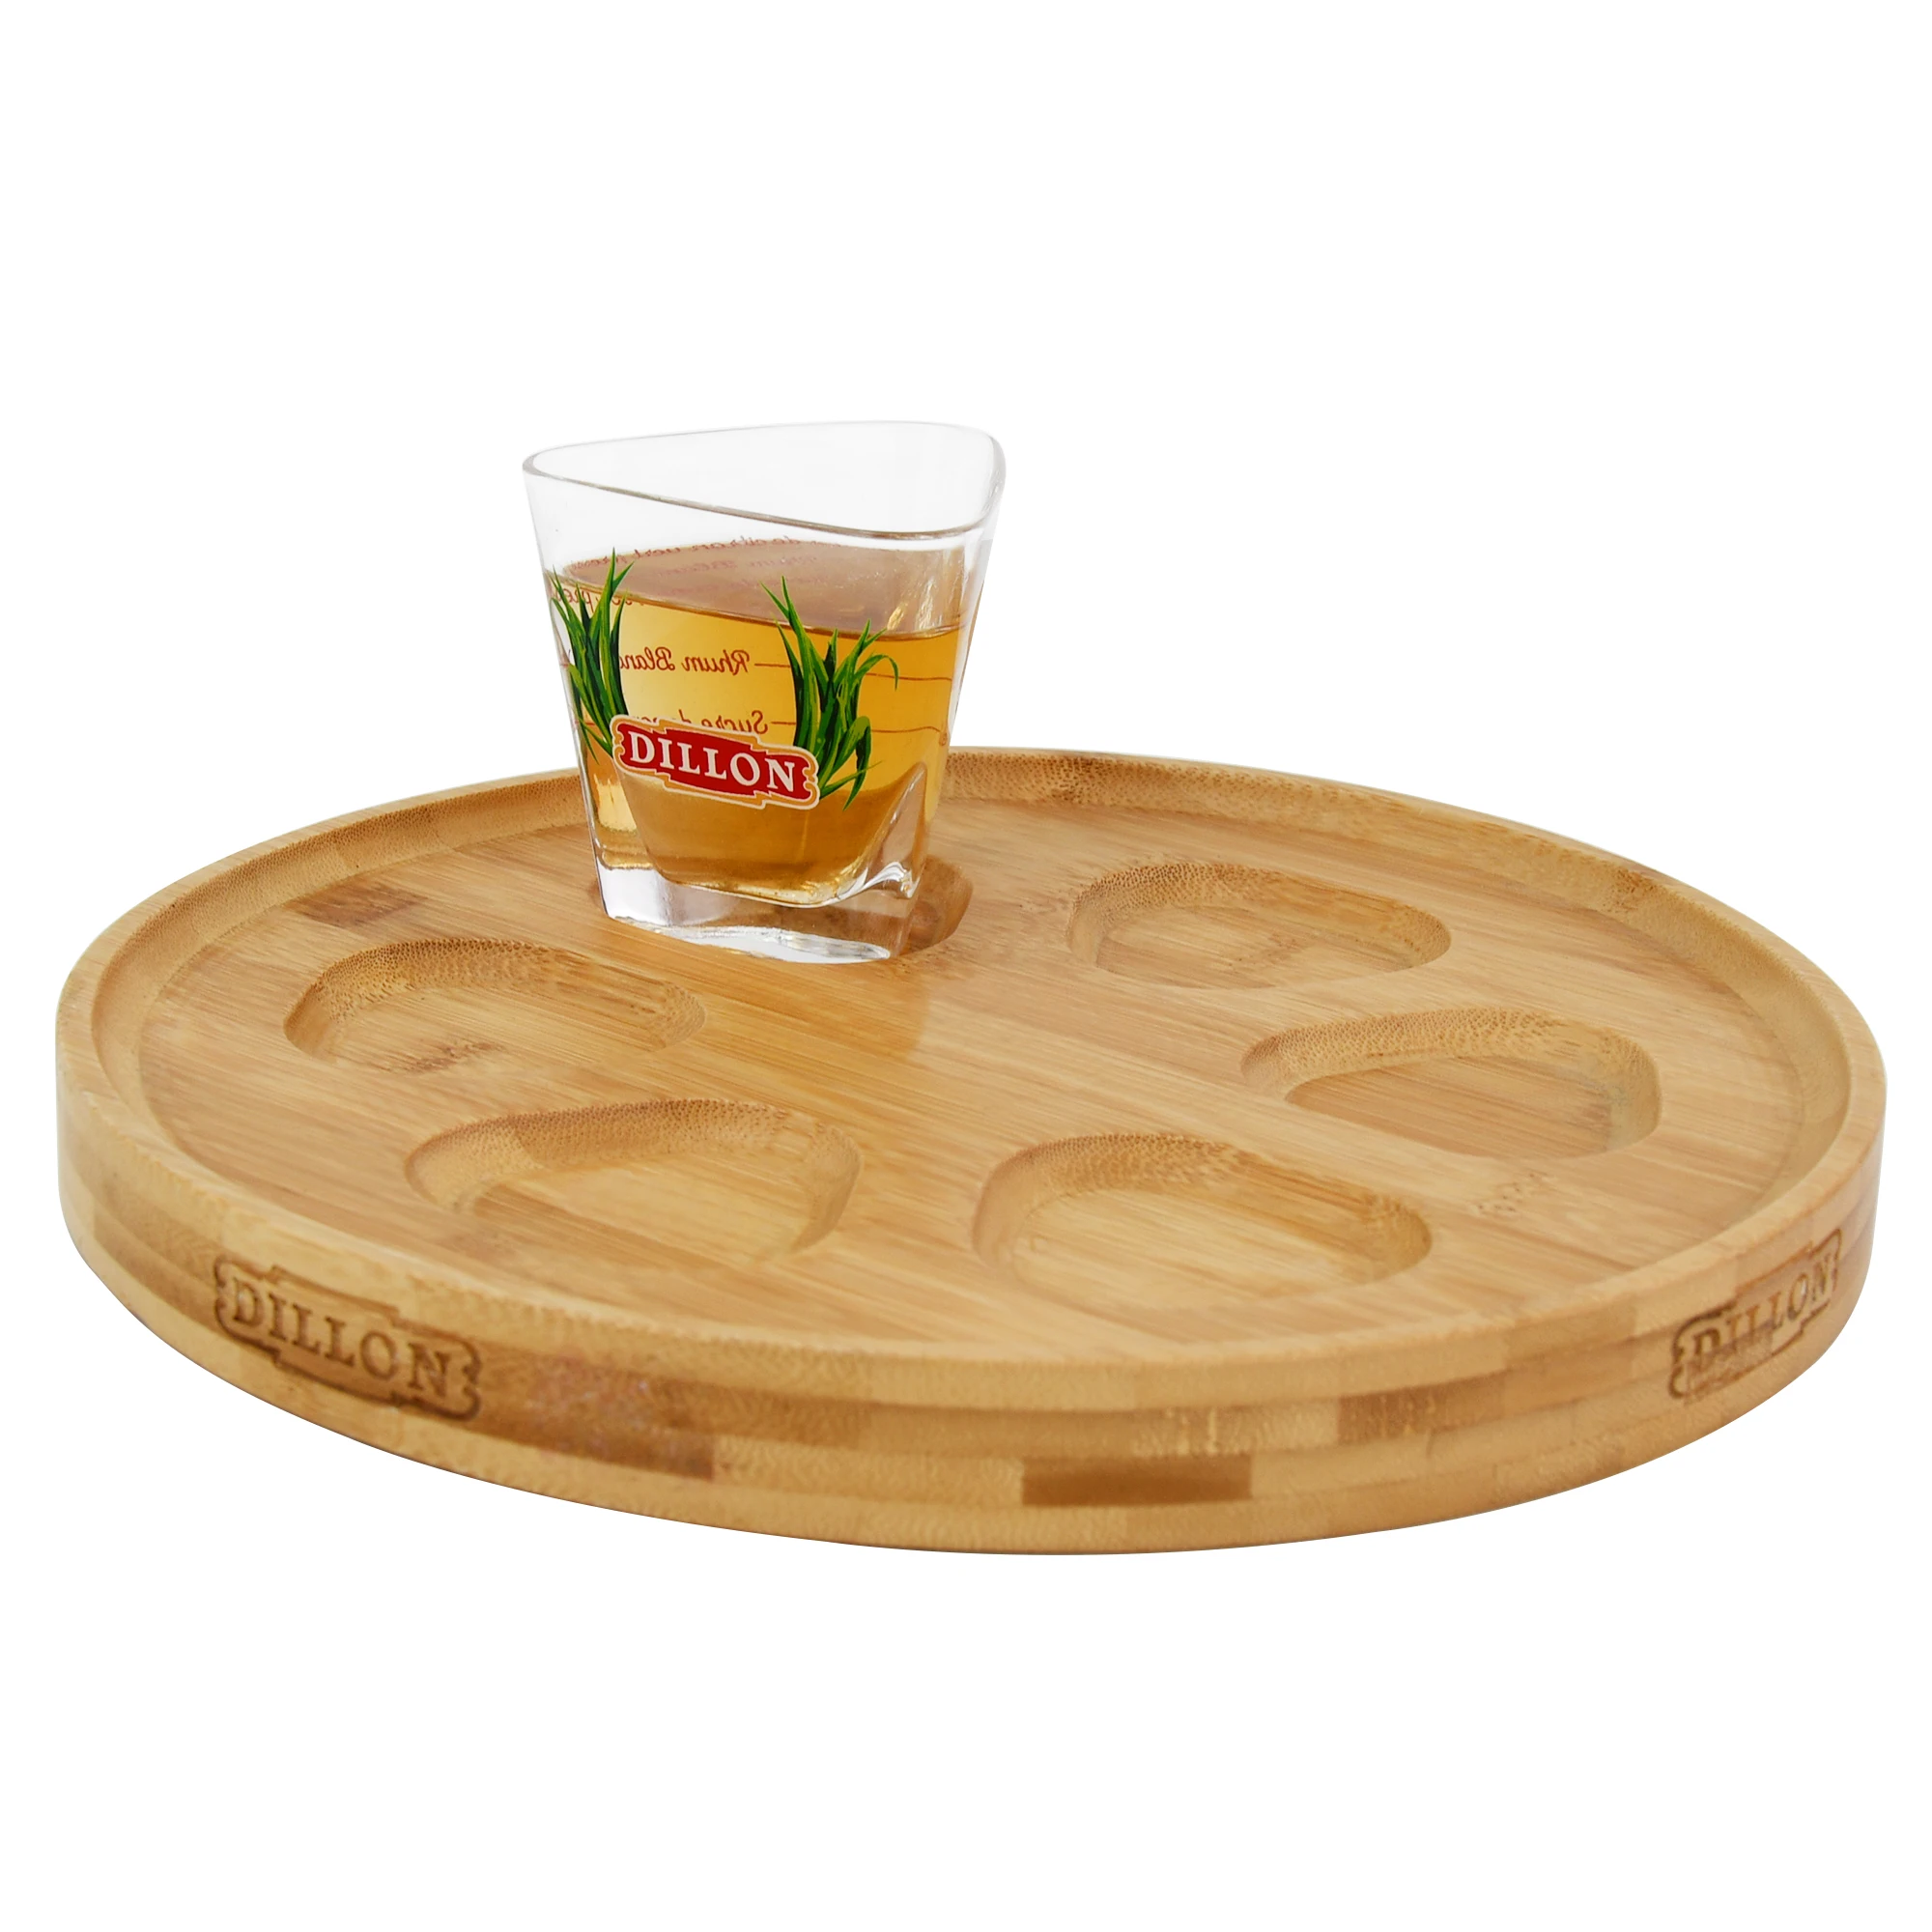 200 Shot Glass Holder Serving Tray For Family Gath, Mini Shot Glass Durable For Party, Bar, Club, Cocktail